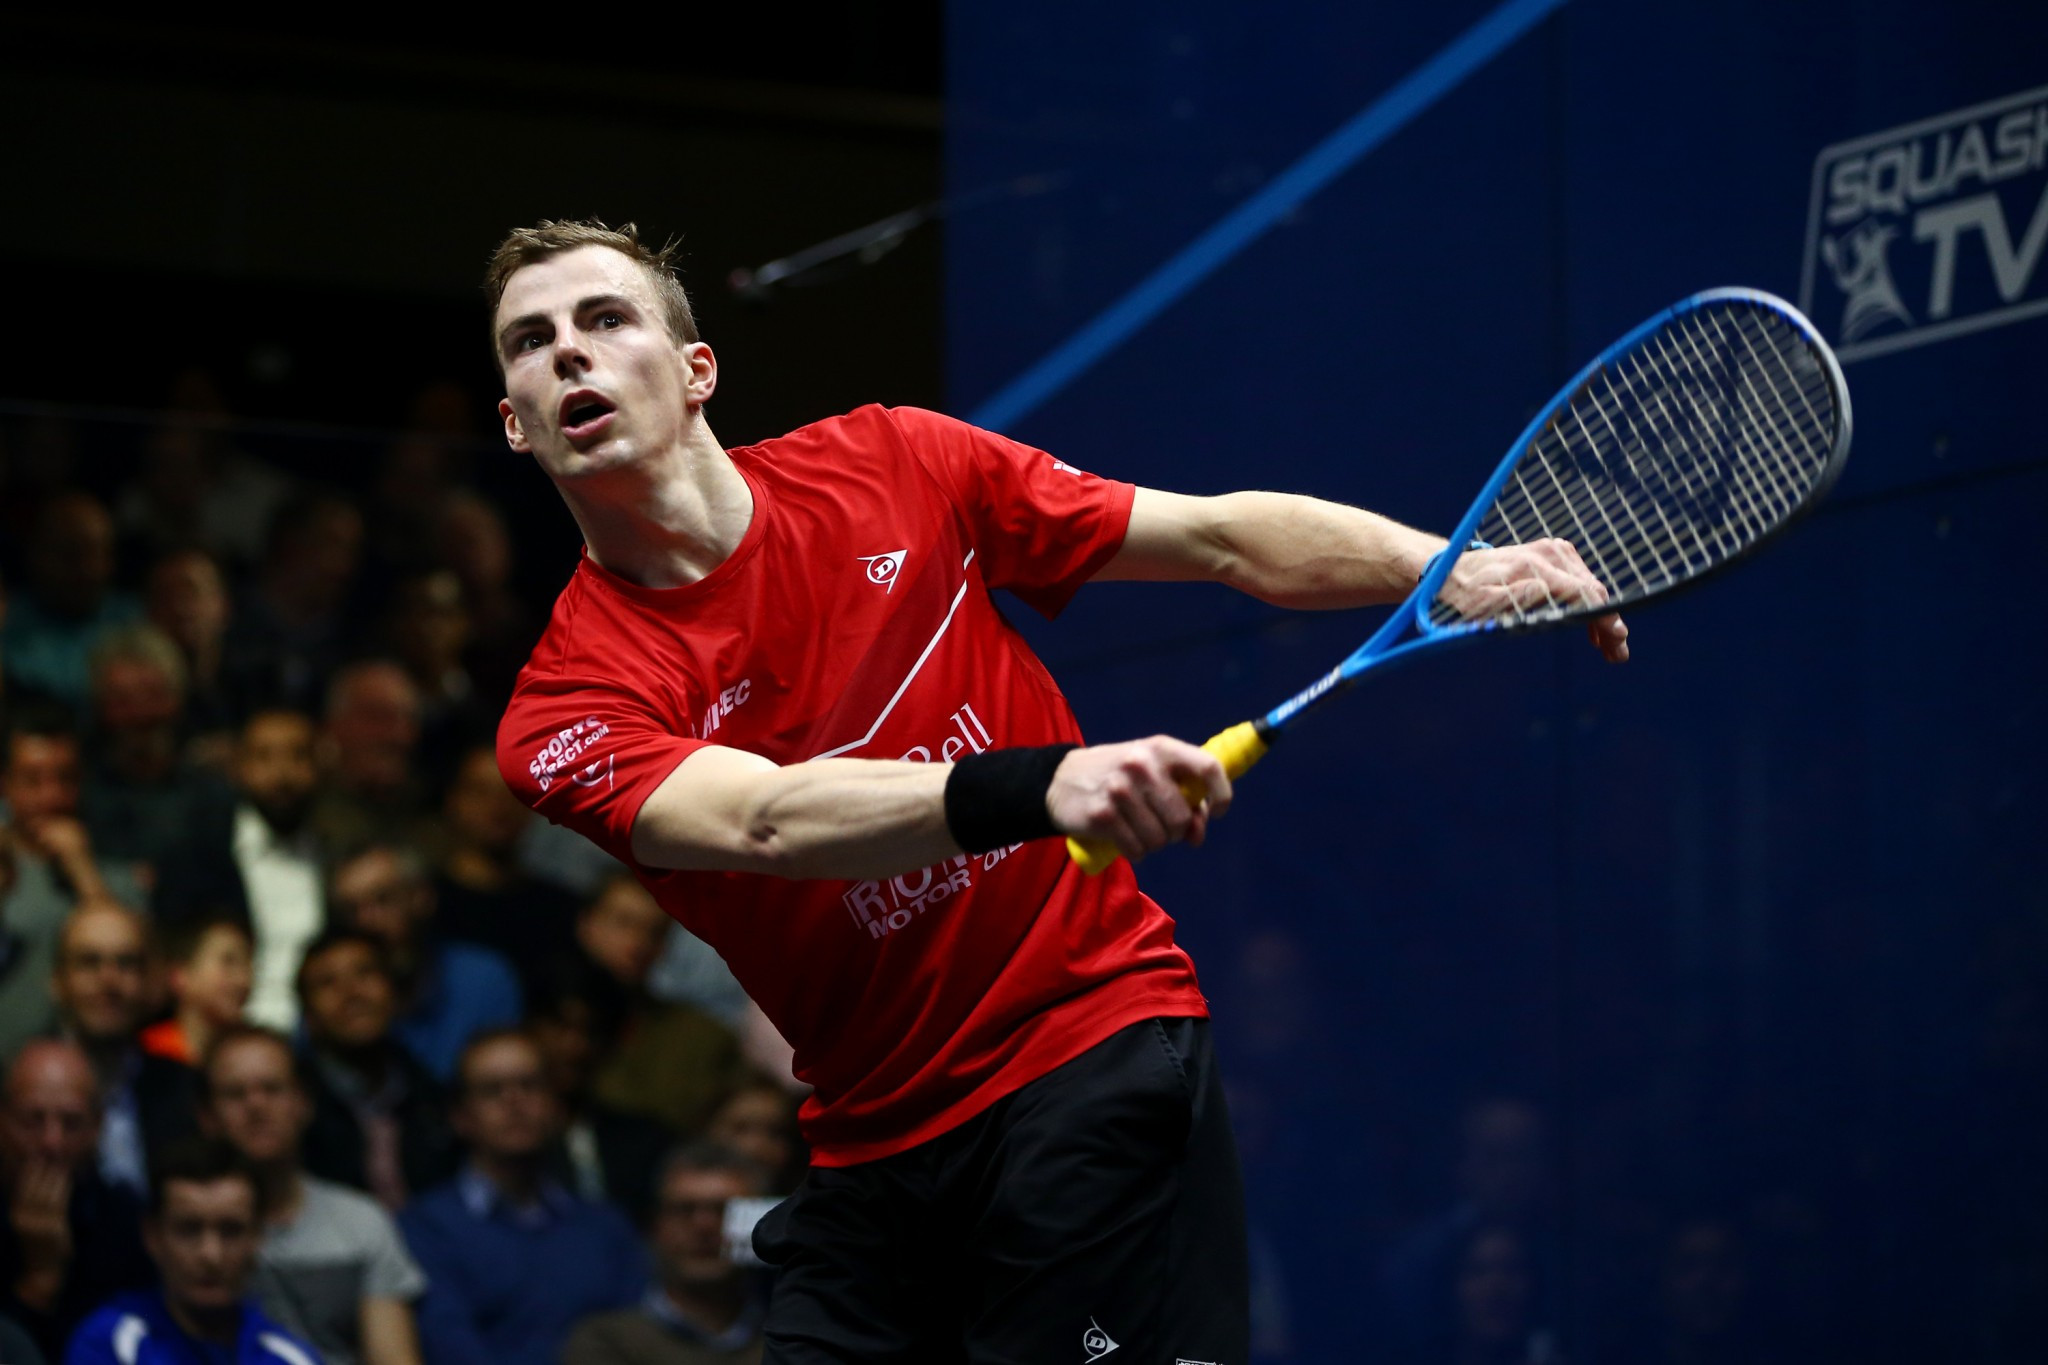 Triple Commonwealth Games squash champion to retire after 2017-2018 campaign